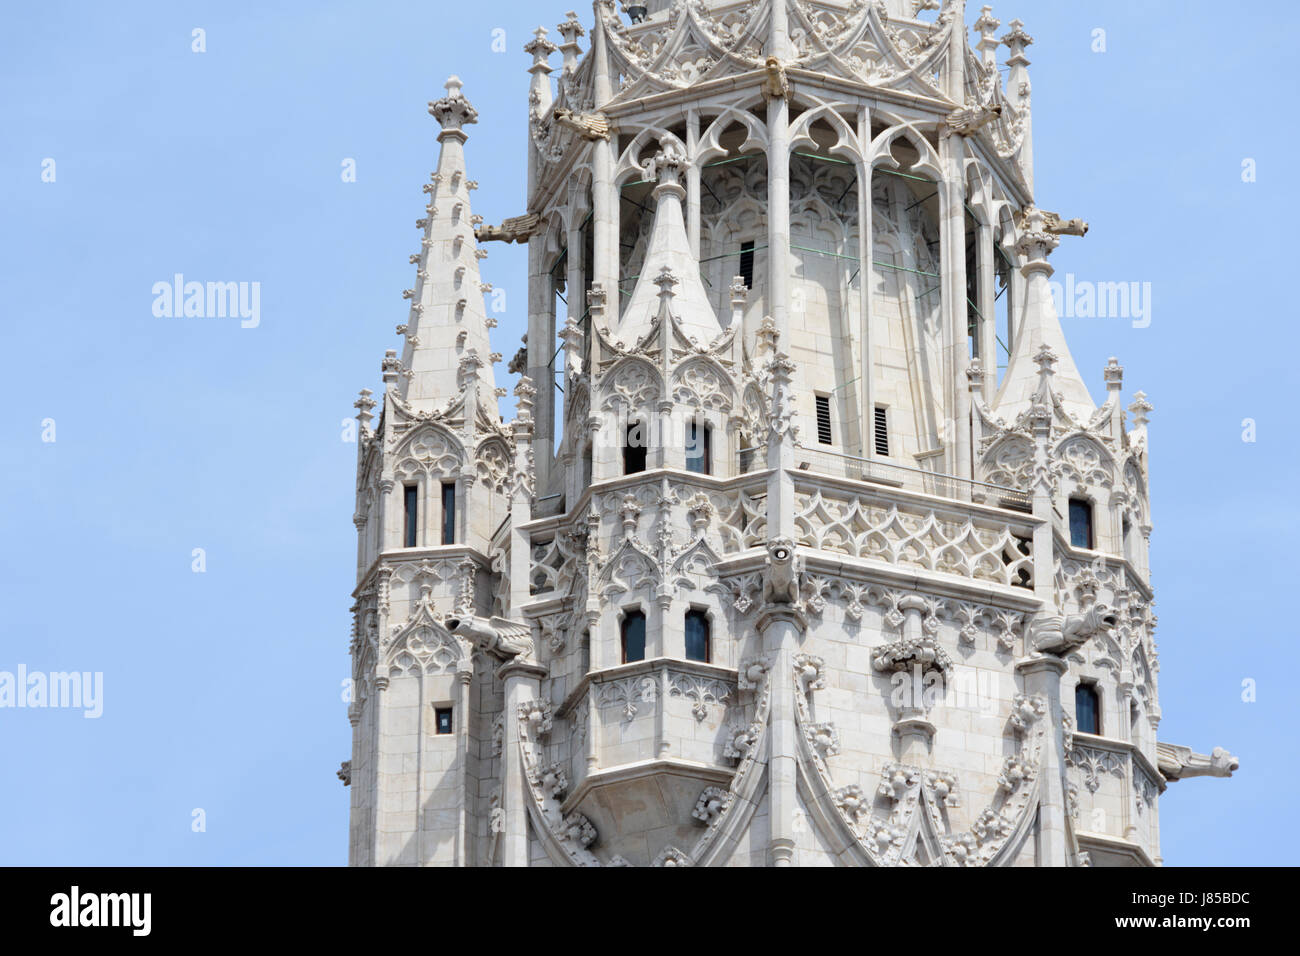 Detail of the tower of the Matthias Church in Budapest, Hungary. Stock Photo